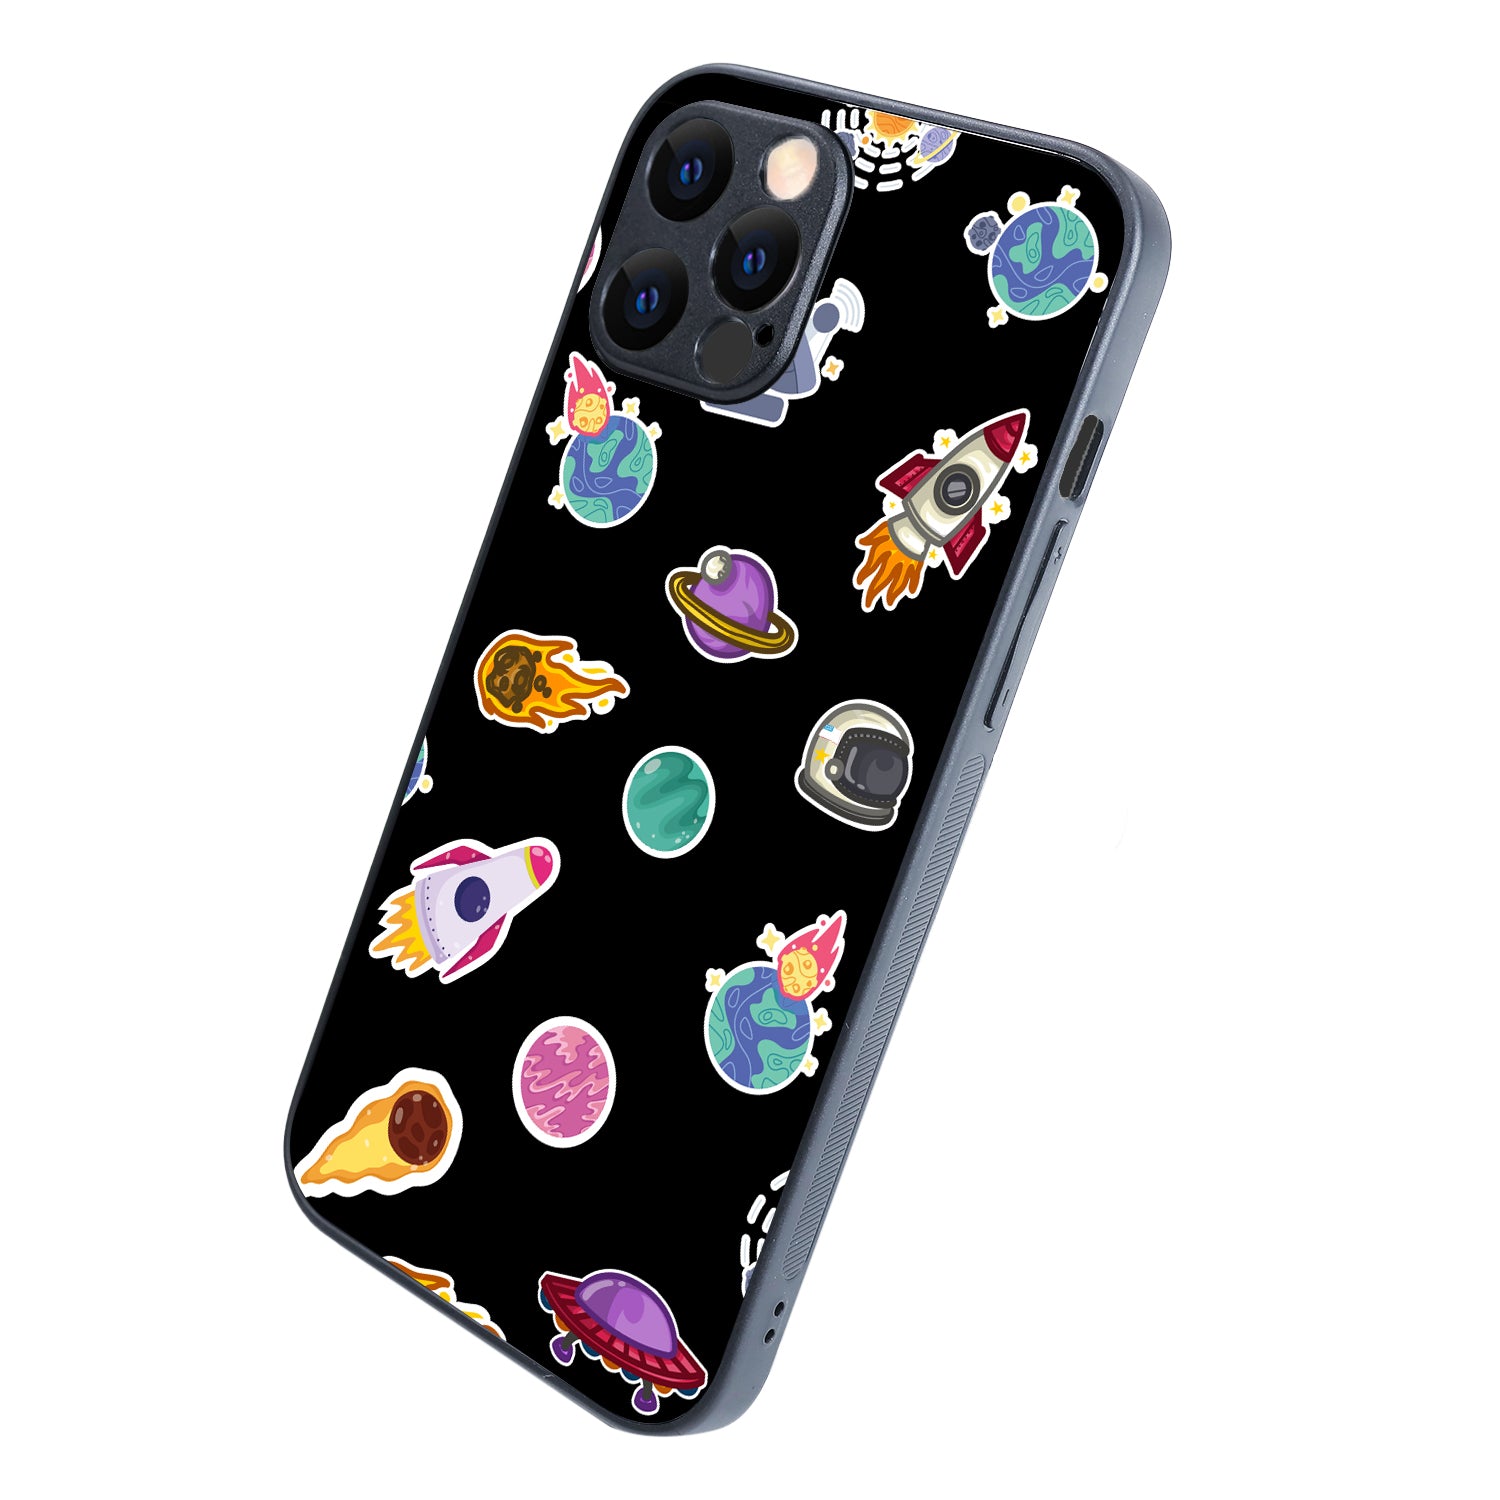 Stickers Space iPhone 12 Pro Max Case